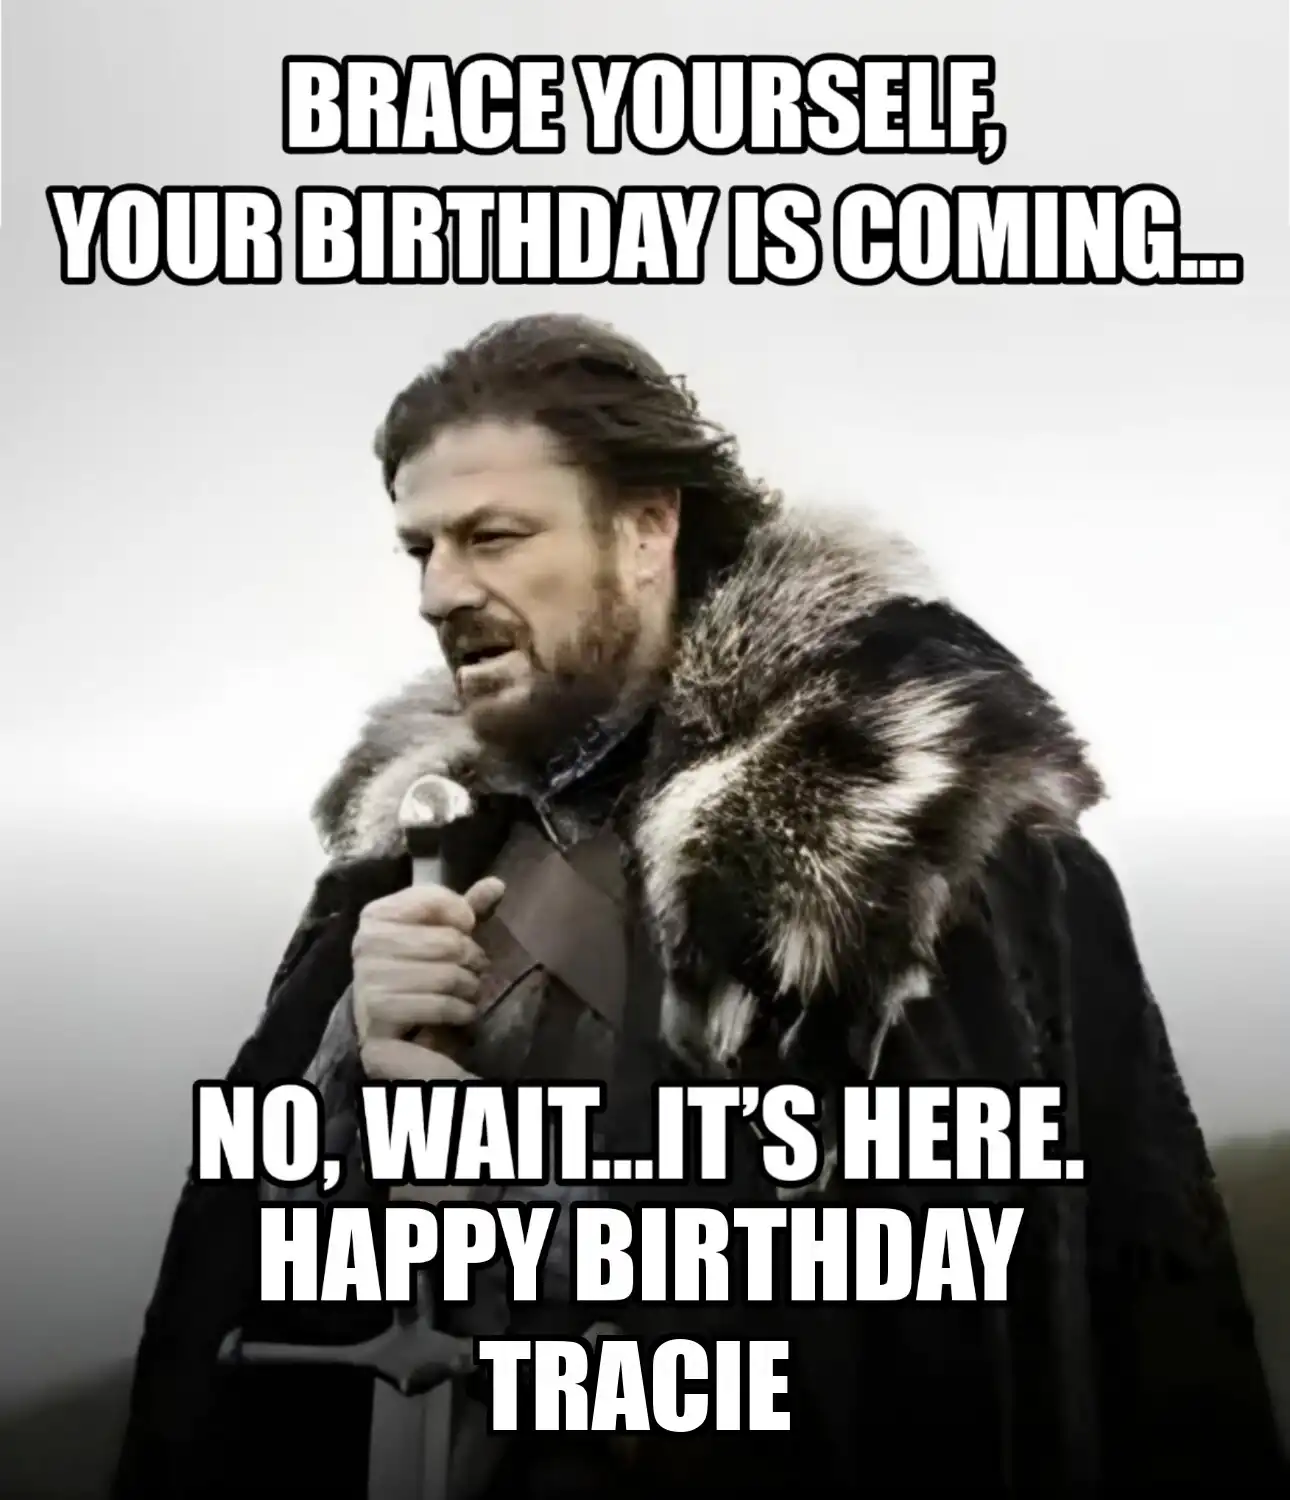 Happy Birthday Tracie Brace Yourself Your Birthday Is Coming Meme